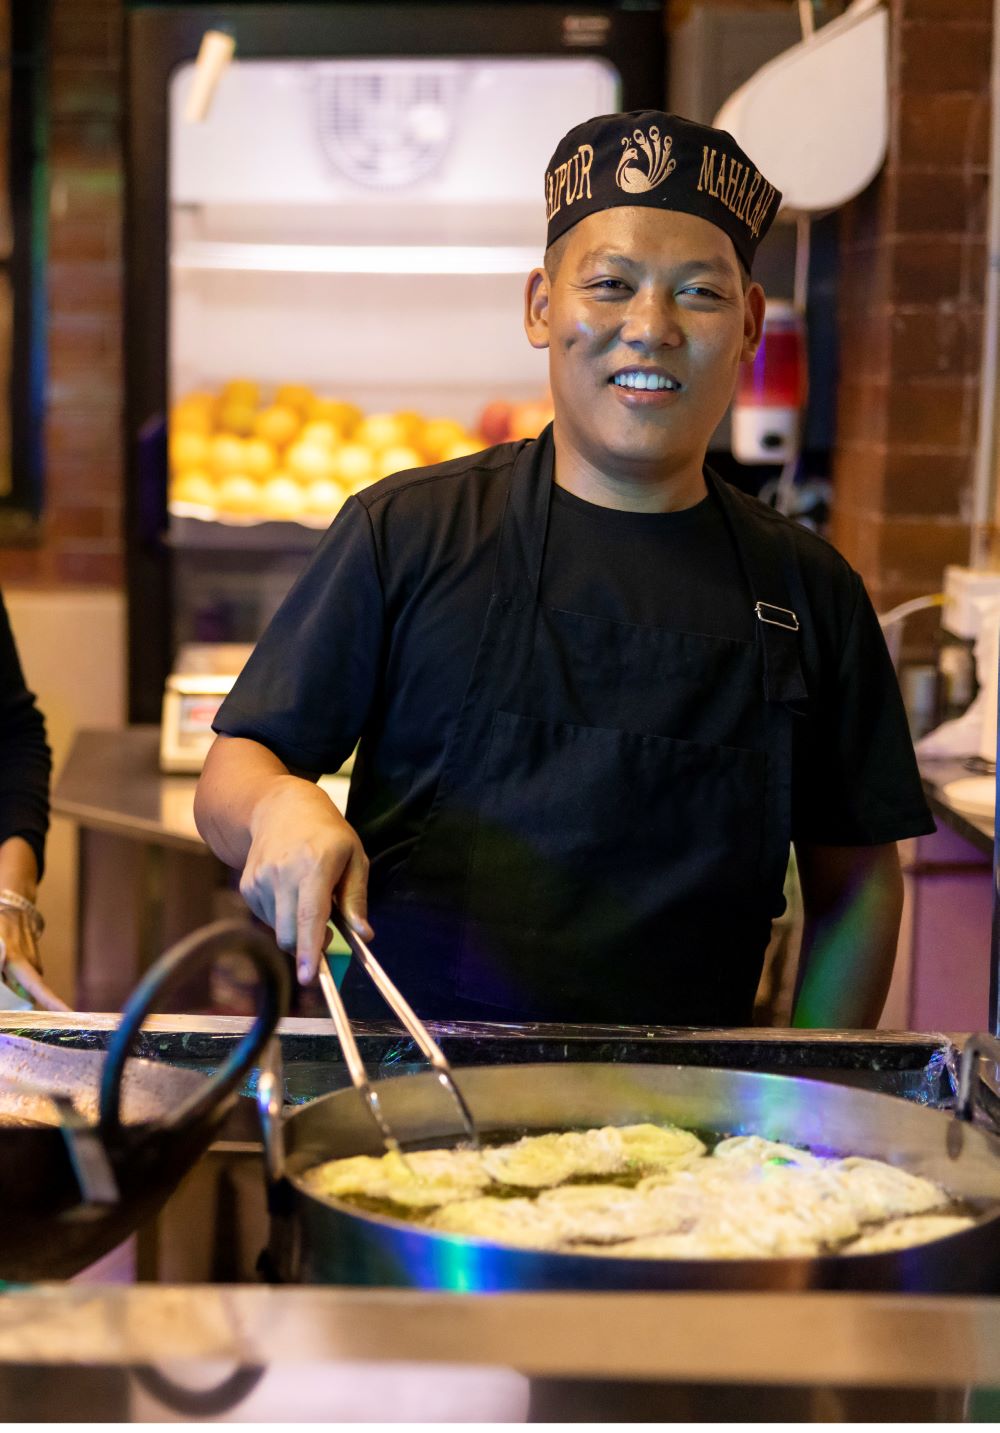 Man smiling and cooking food in oil